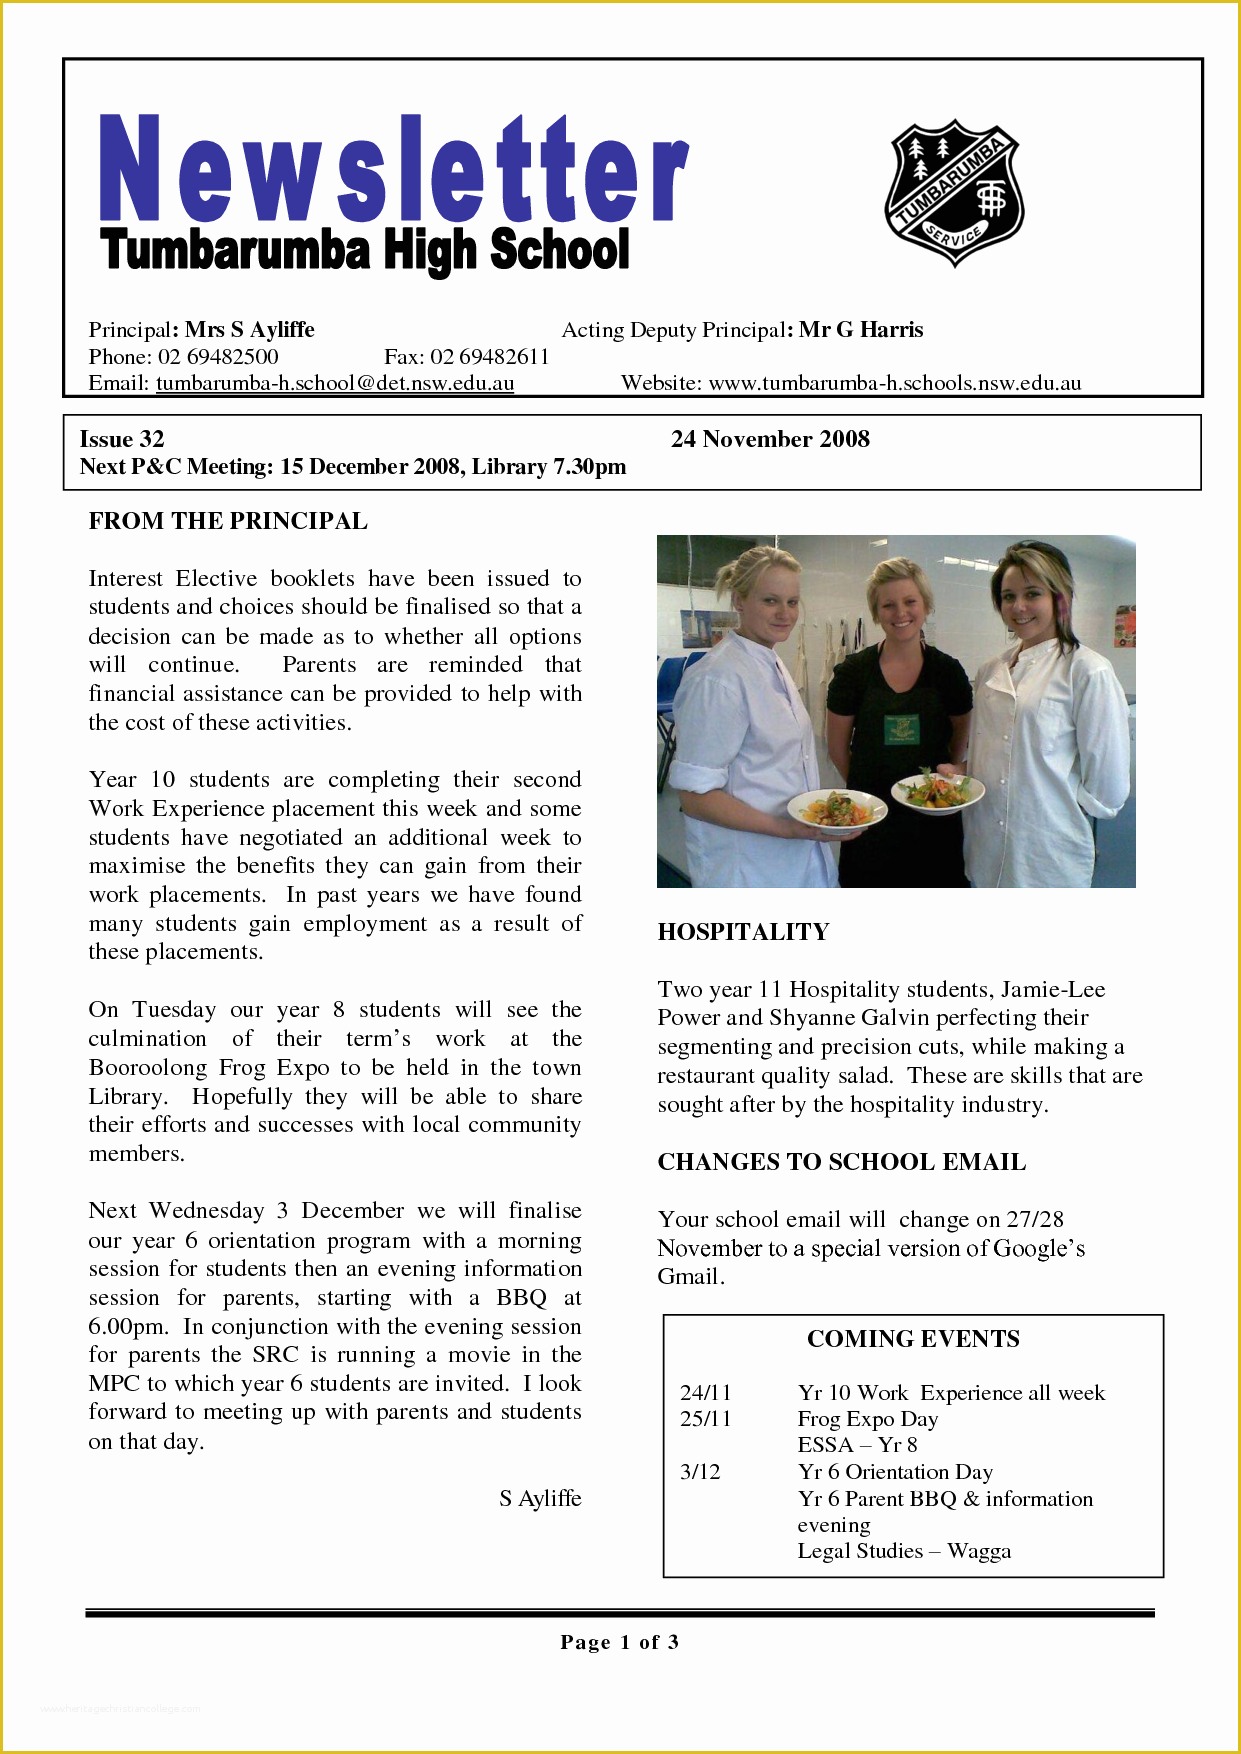 Middle School Newsletter Templates Free Of 17 Awesome High School Newsletter Templates Images